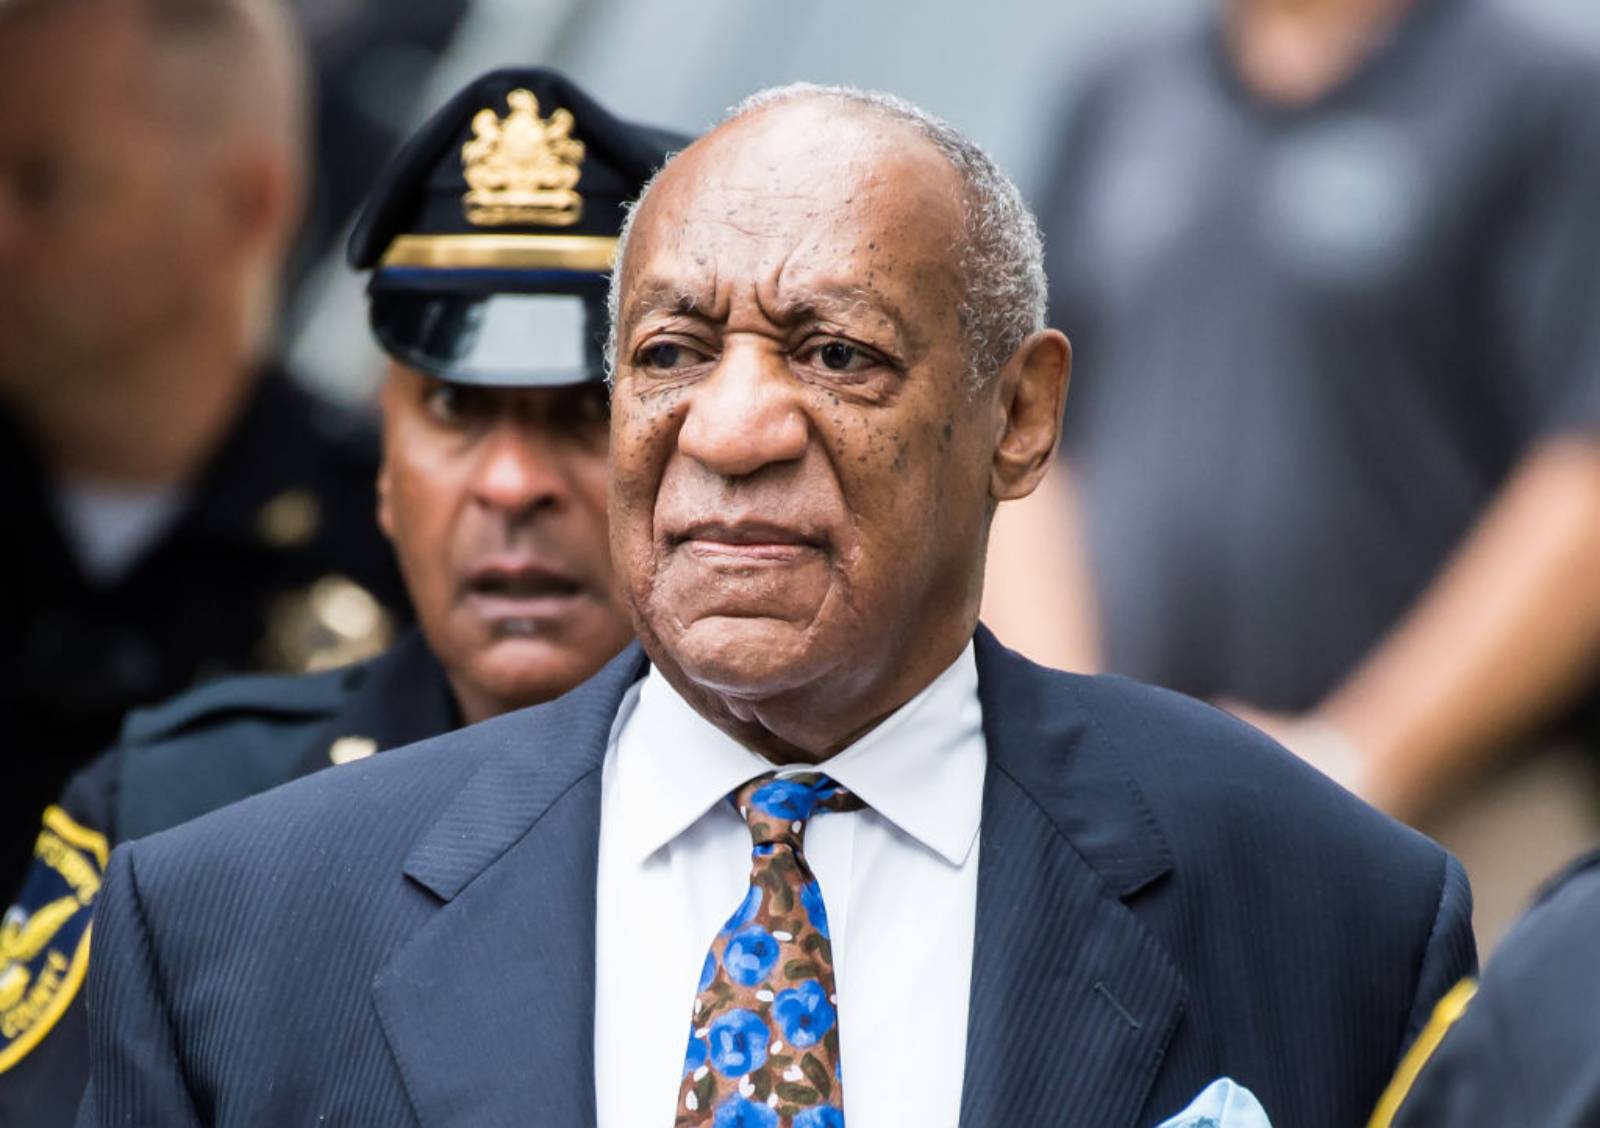 Actor/stand-up comedian Bill Cosby arrives for sentencing for his sexual assault trial at the Montgomery County Courthouse on September 24, 2018 in Norristown, Pennsylvania. (Photo by Gilbert Carrasquillo/Getty Images)